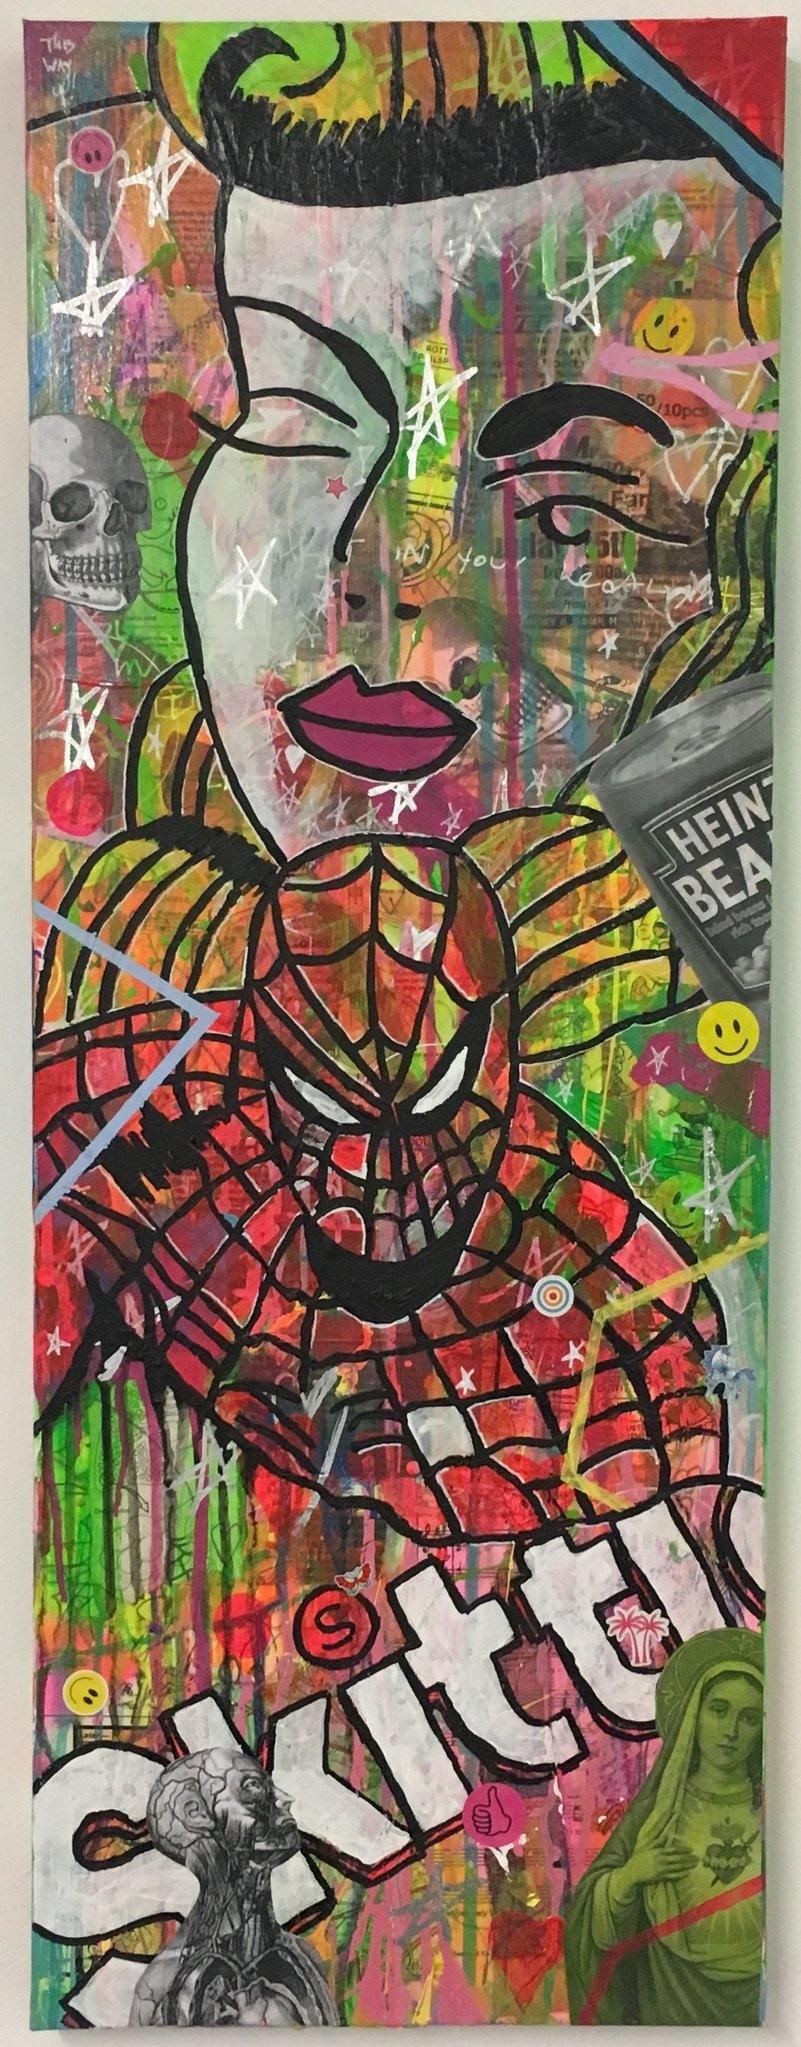 Truth to form by Barrie J Davies 2018, Mixed media on canvas, 30cm x 80cm, unframed. Barrie J Davies is an Artist - Pop Art and Street art inspired Artist based in Brighton England UK - Pop Art Paintings, Street Art Prints & Editions available.